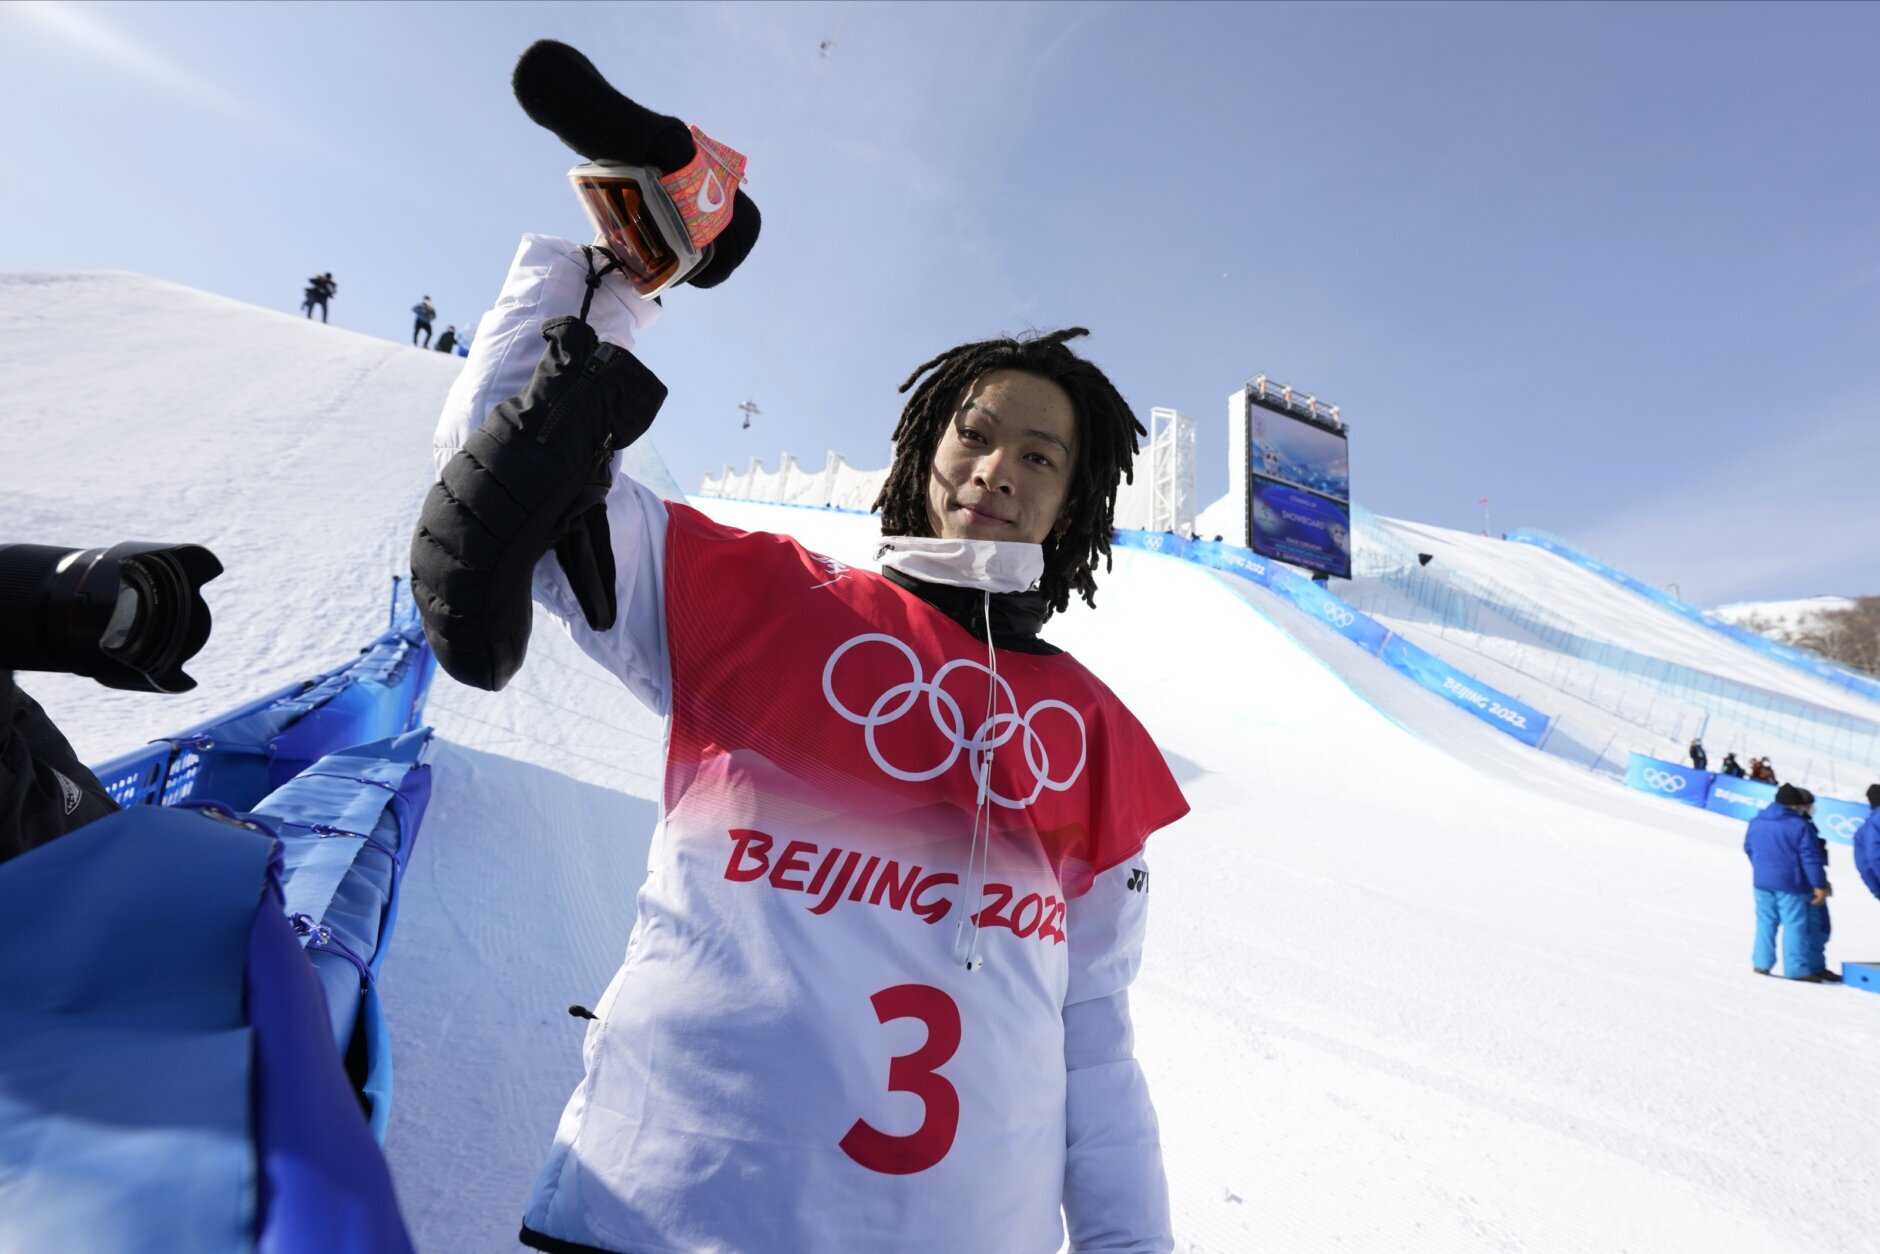 Shaun White proves he's greatest snowboarder ever, winning third career  gold medal - The Washington Post